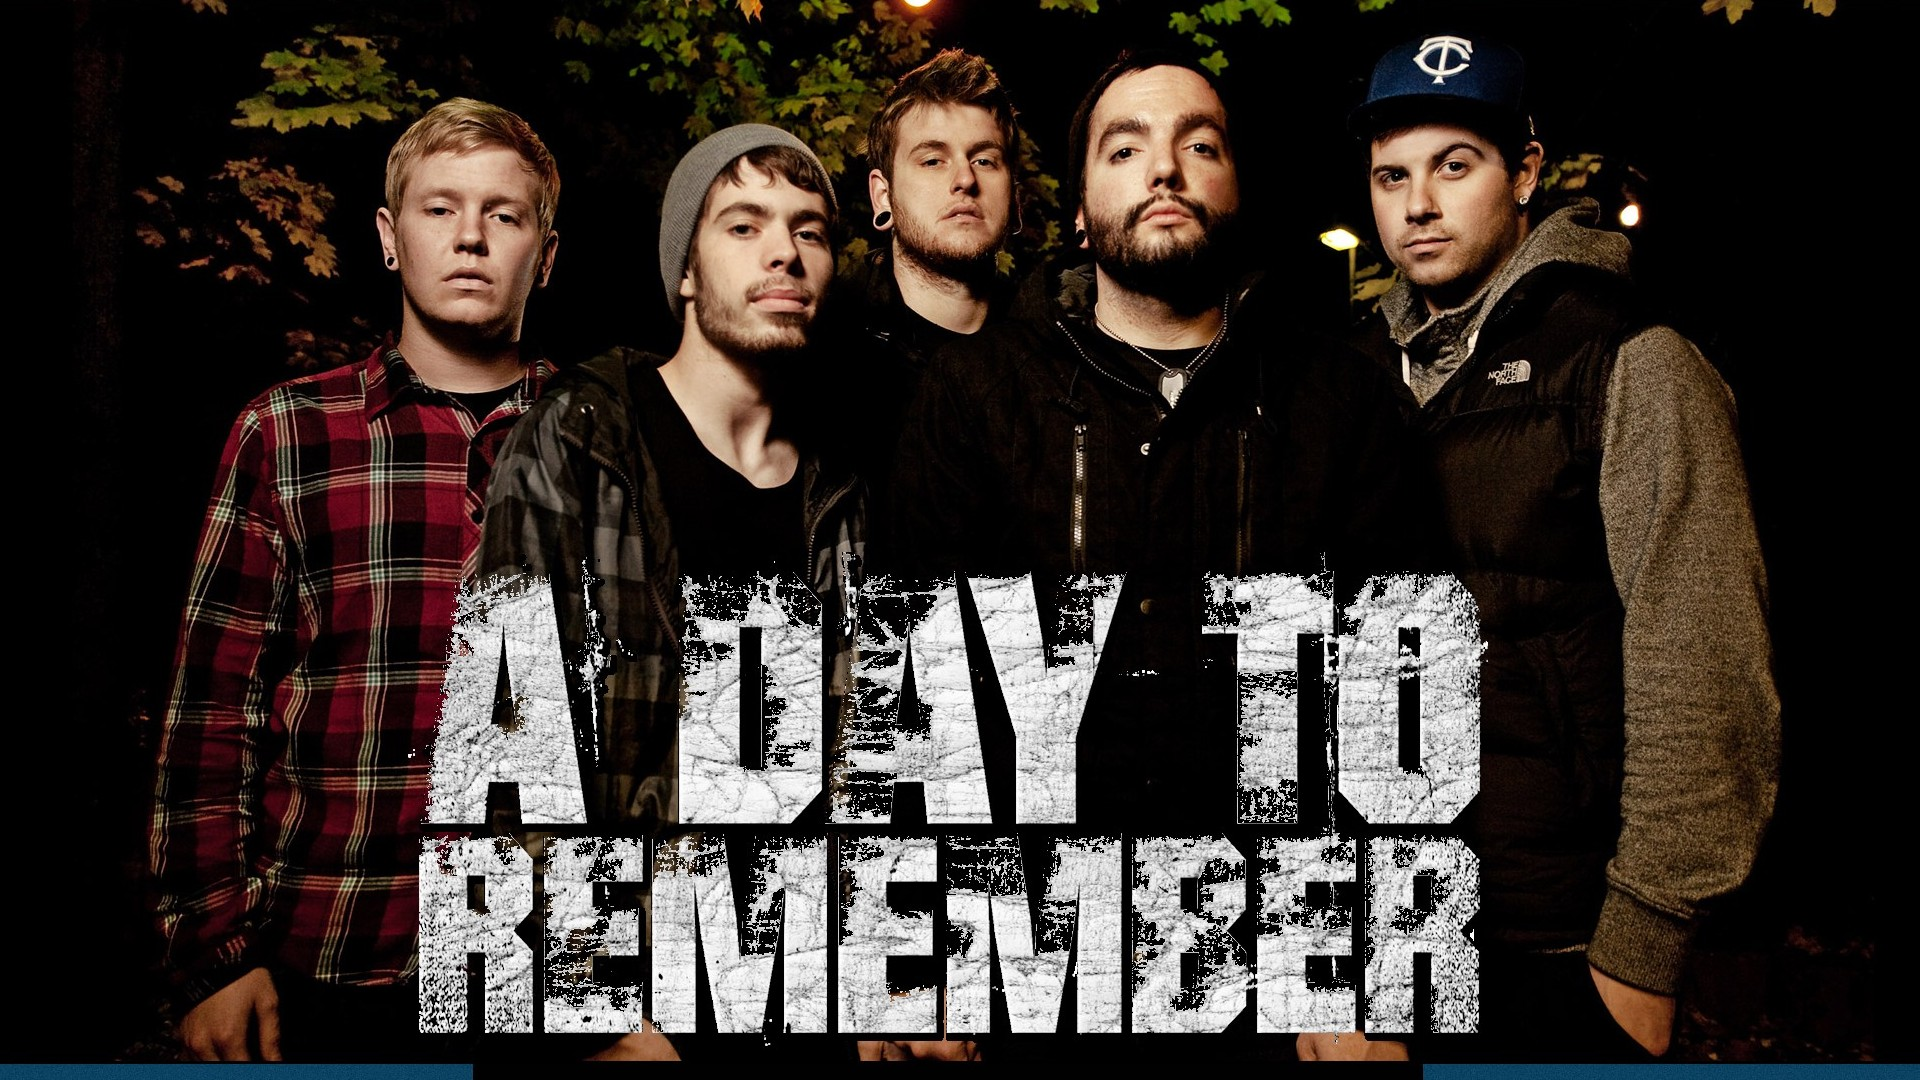 Группа a Day to remember. A Day to remember Band. A Day to remember 2020. Плакат группы a Day to remember. Holiday to remember